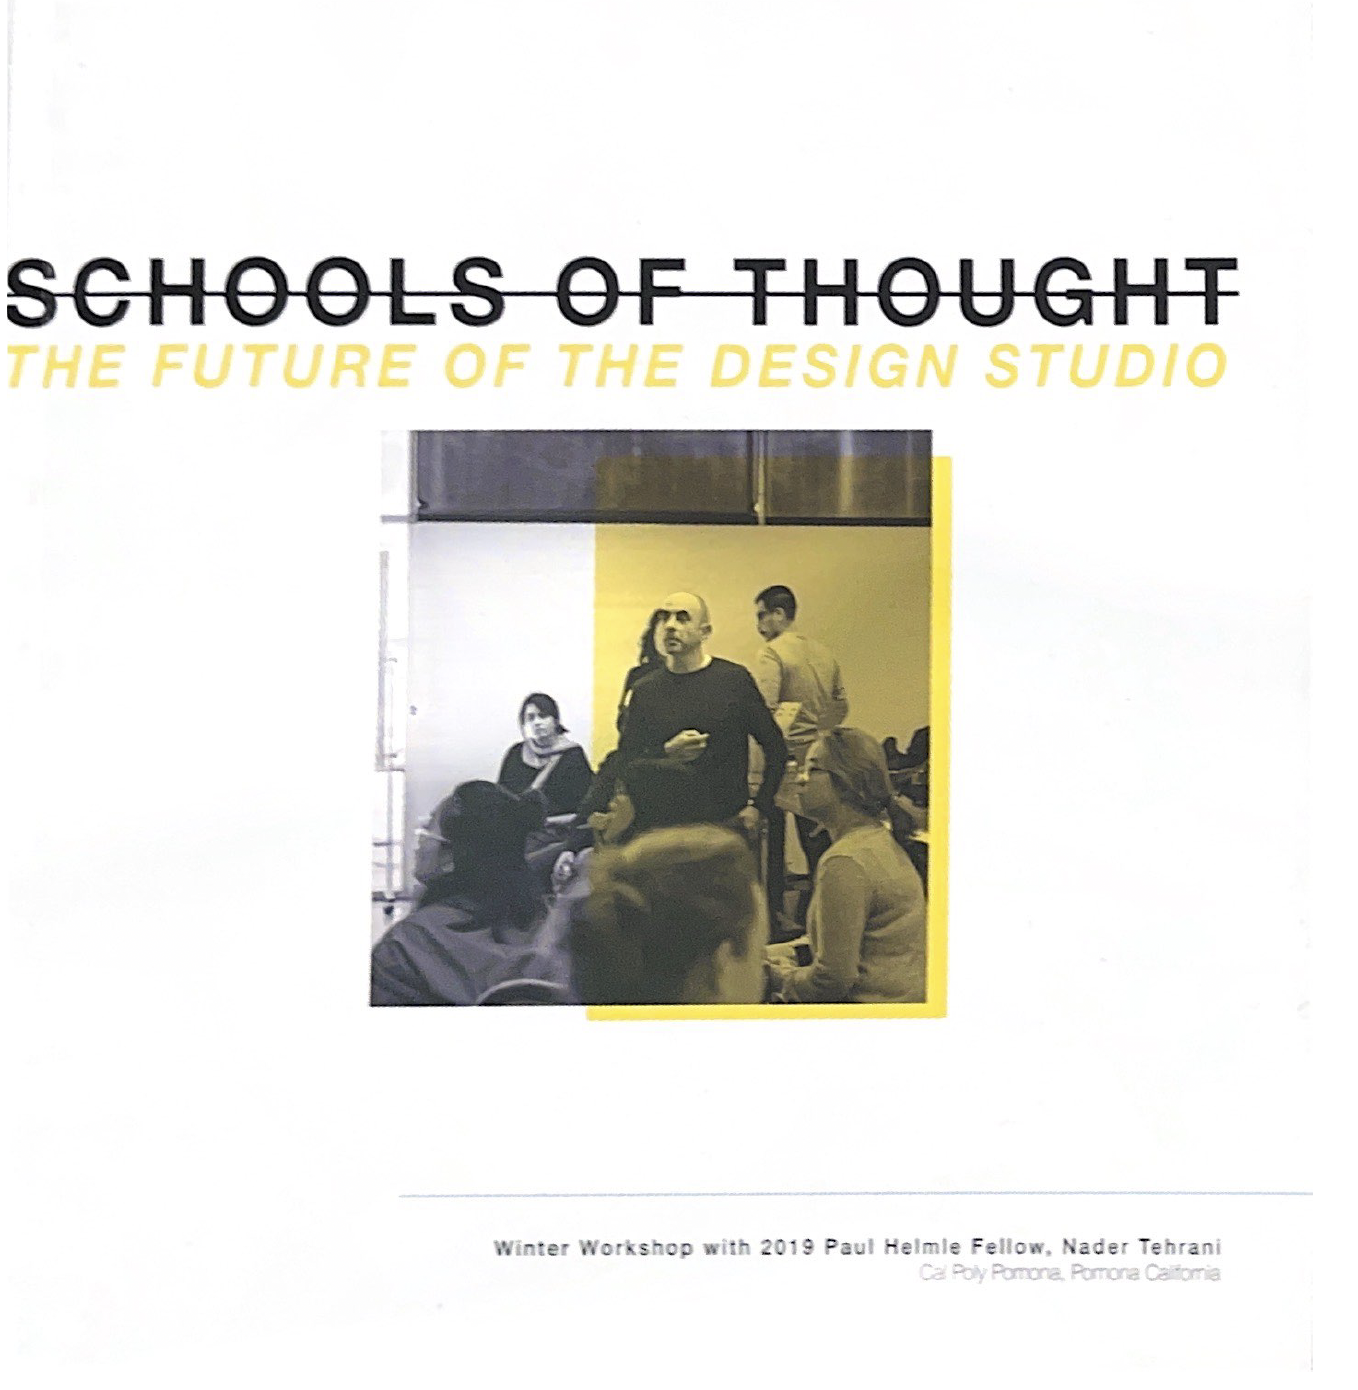 Schools of Thought: The Future of the Design Studio Winter Workshop with 2019 Paul Hello Fellow, Nader Tehrani : Image description: White and yellow book with title schools of thought